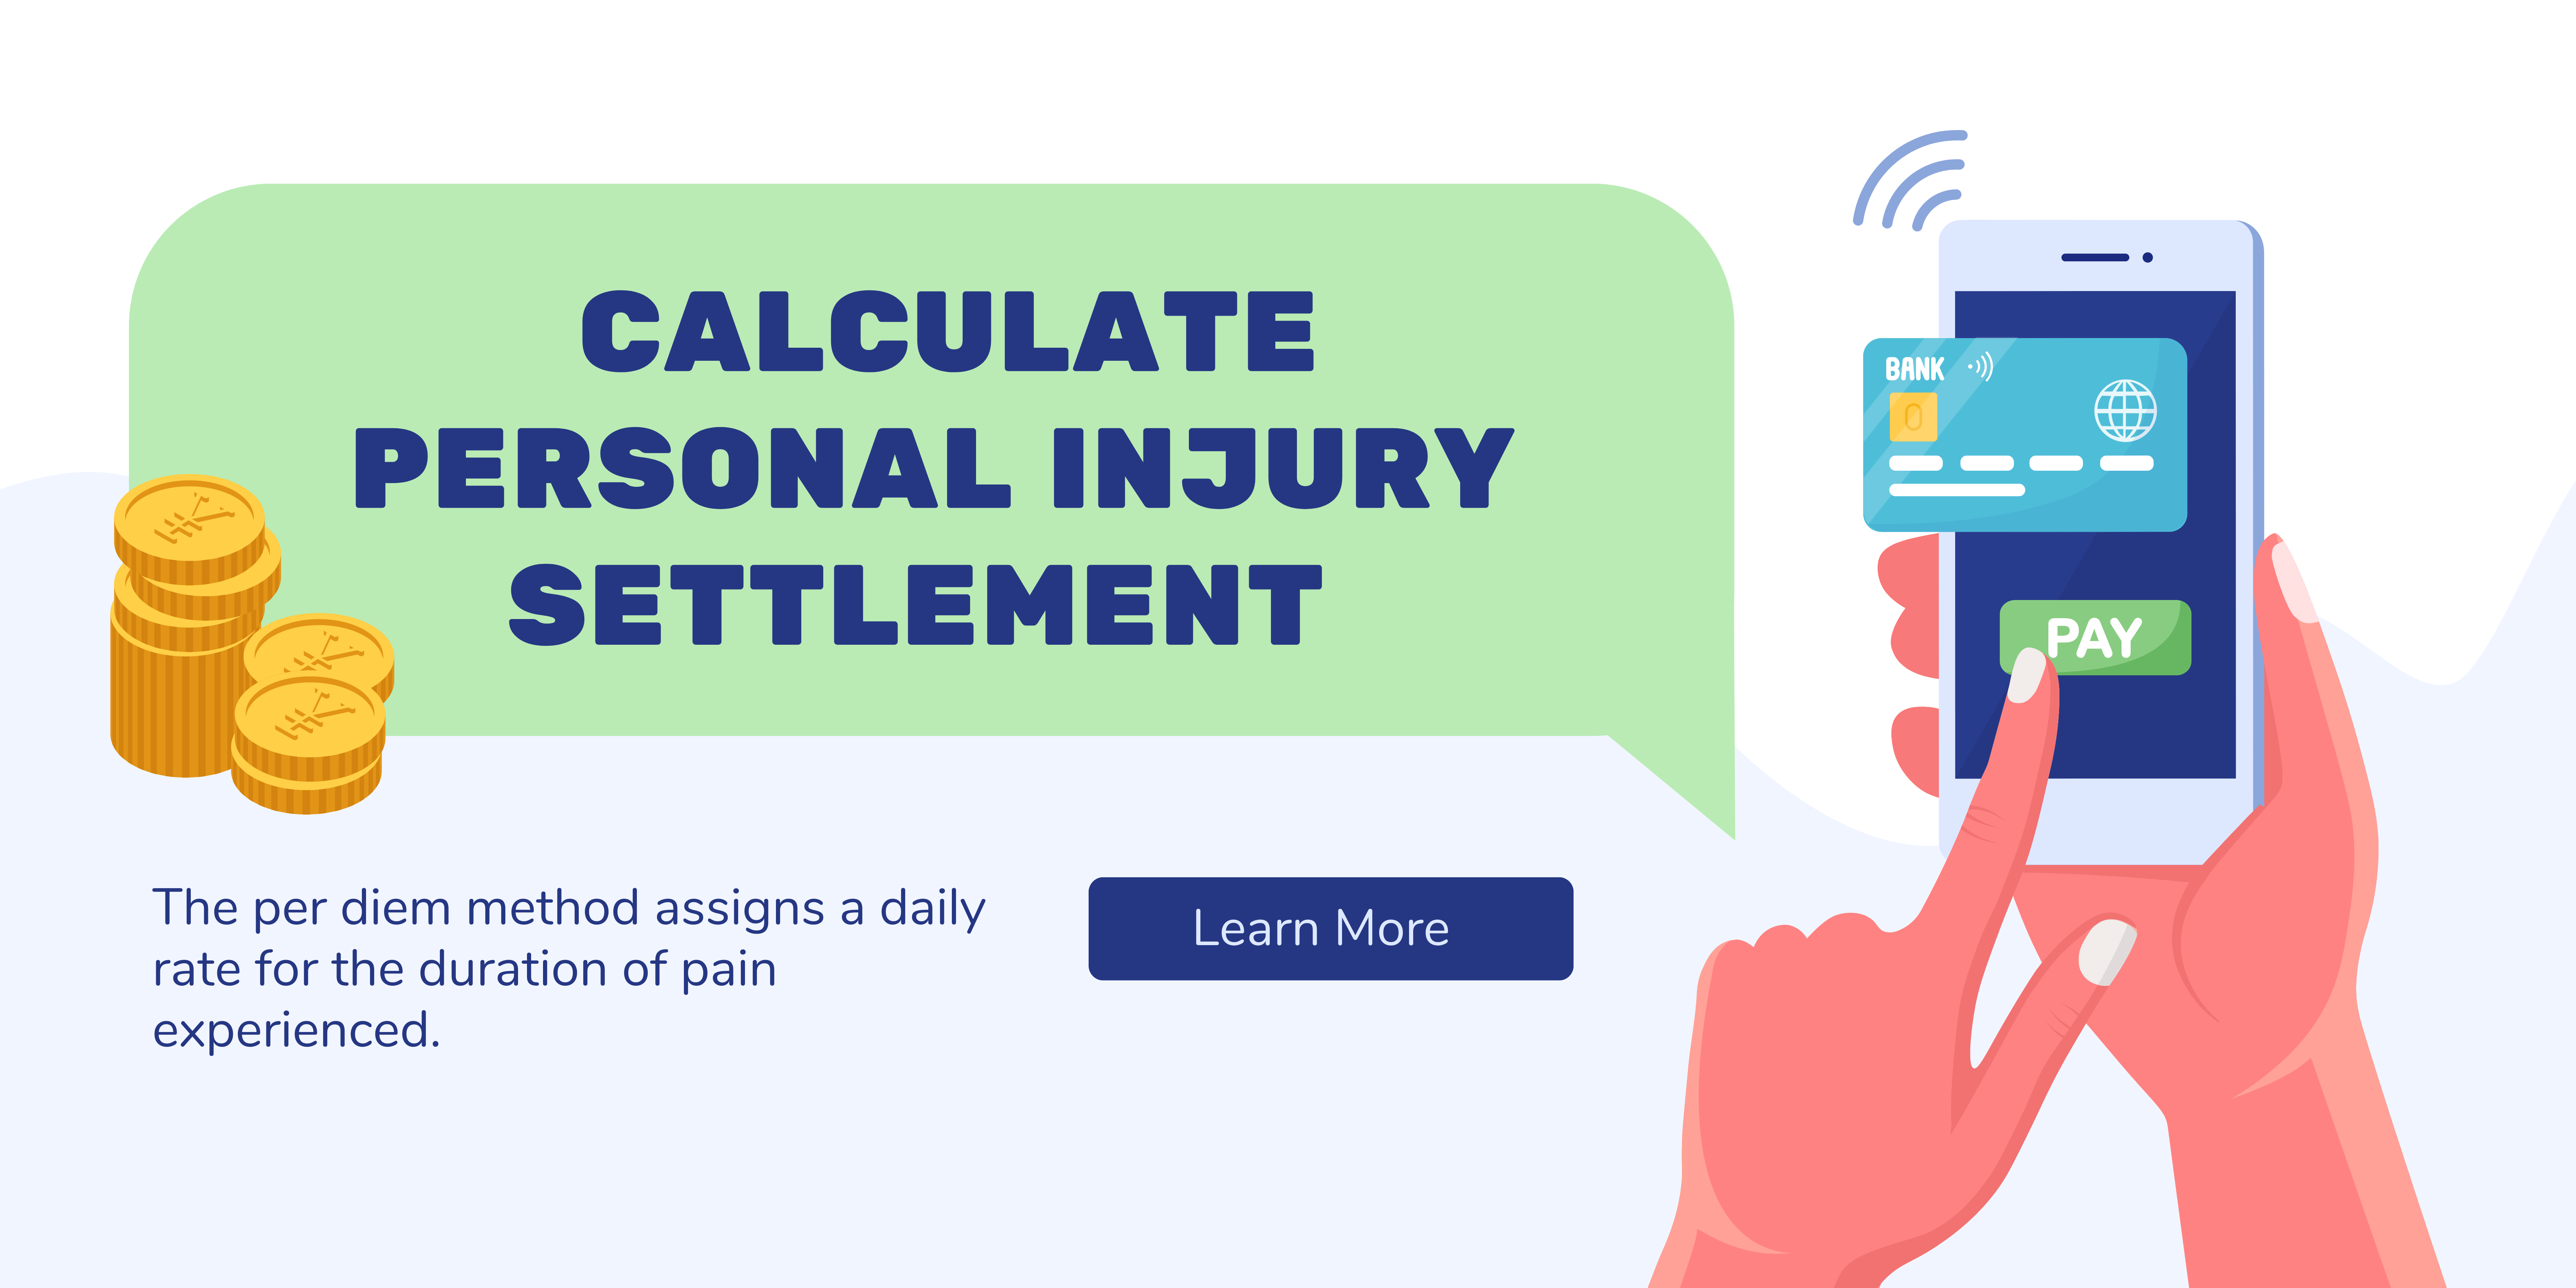 Calculate Personal Injury Settlement